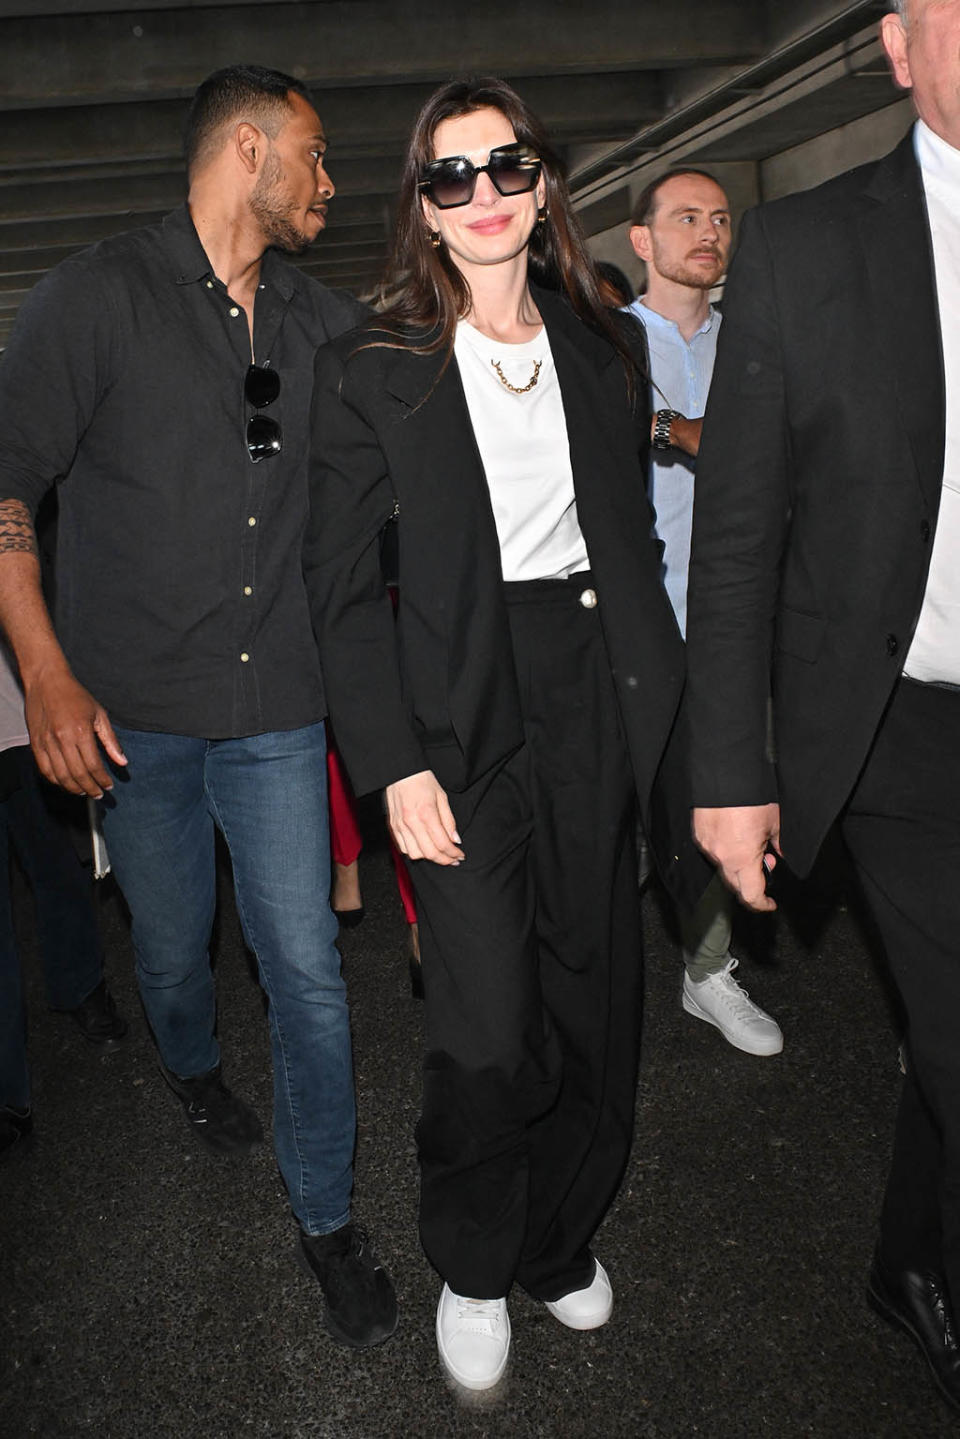 Anne Hathaway at Nice Airport ahead of the Cannes Film Festival in France on May 18, 2022. - Credit: Julien Reynaud/APS-Medias/AbacaP